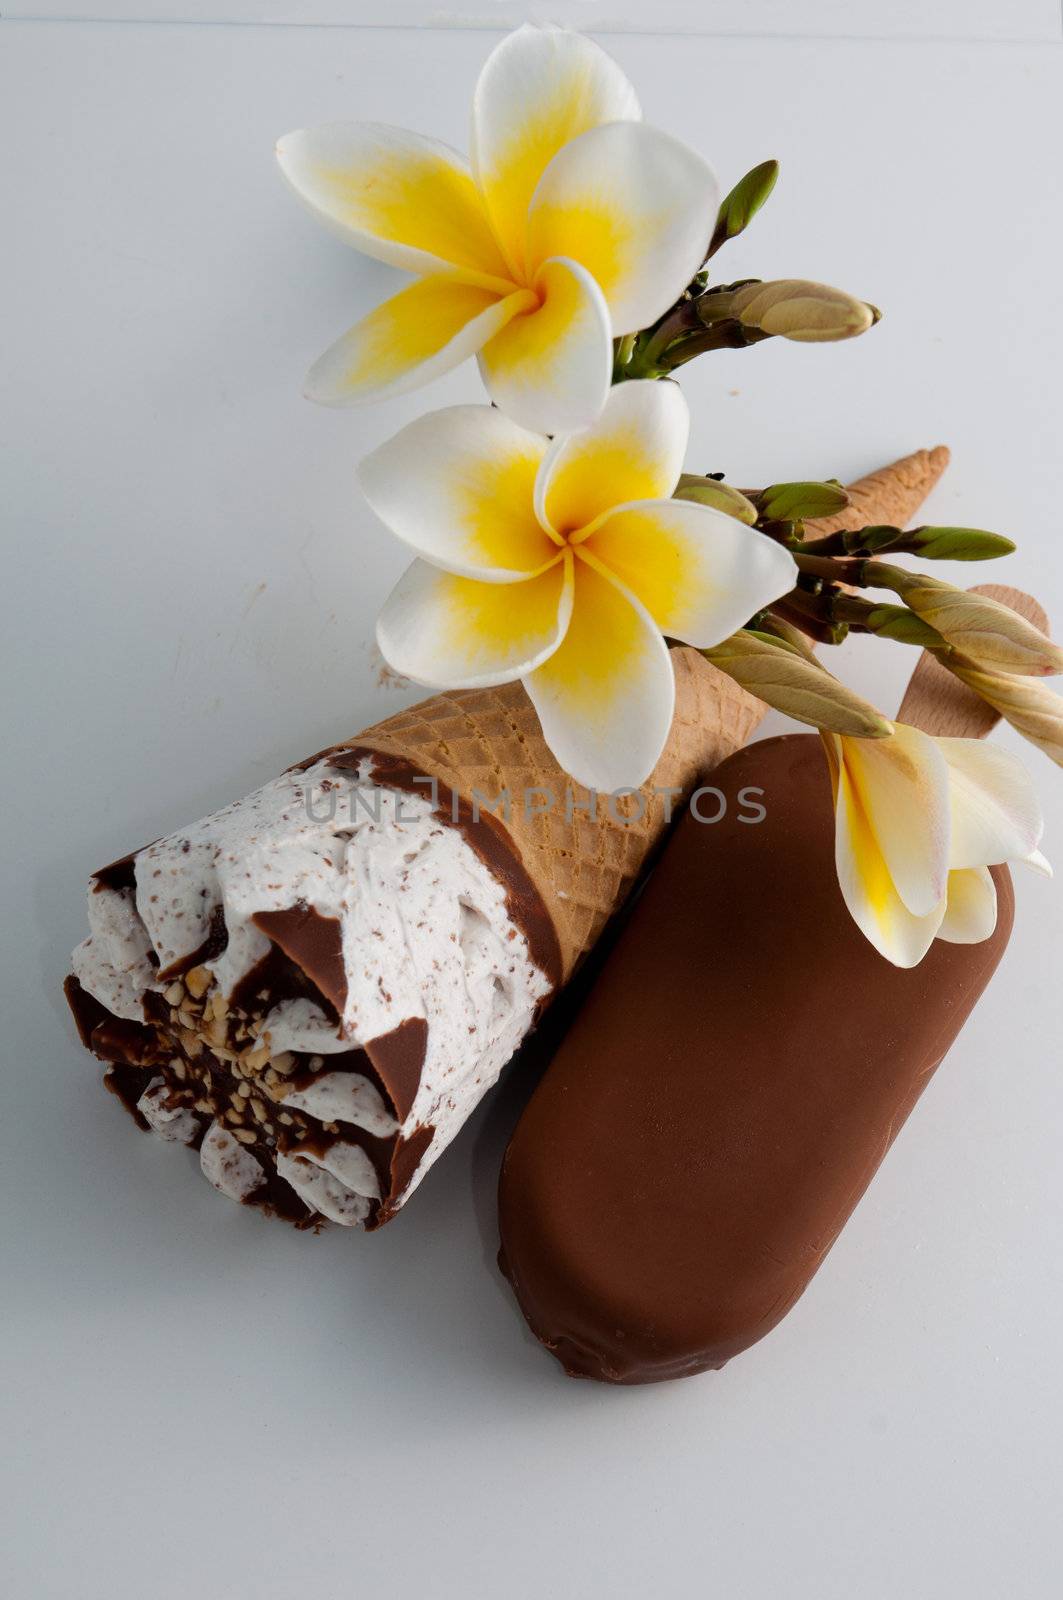 Delicious icecream and magnolia flowers on a white background .